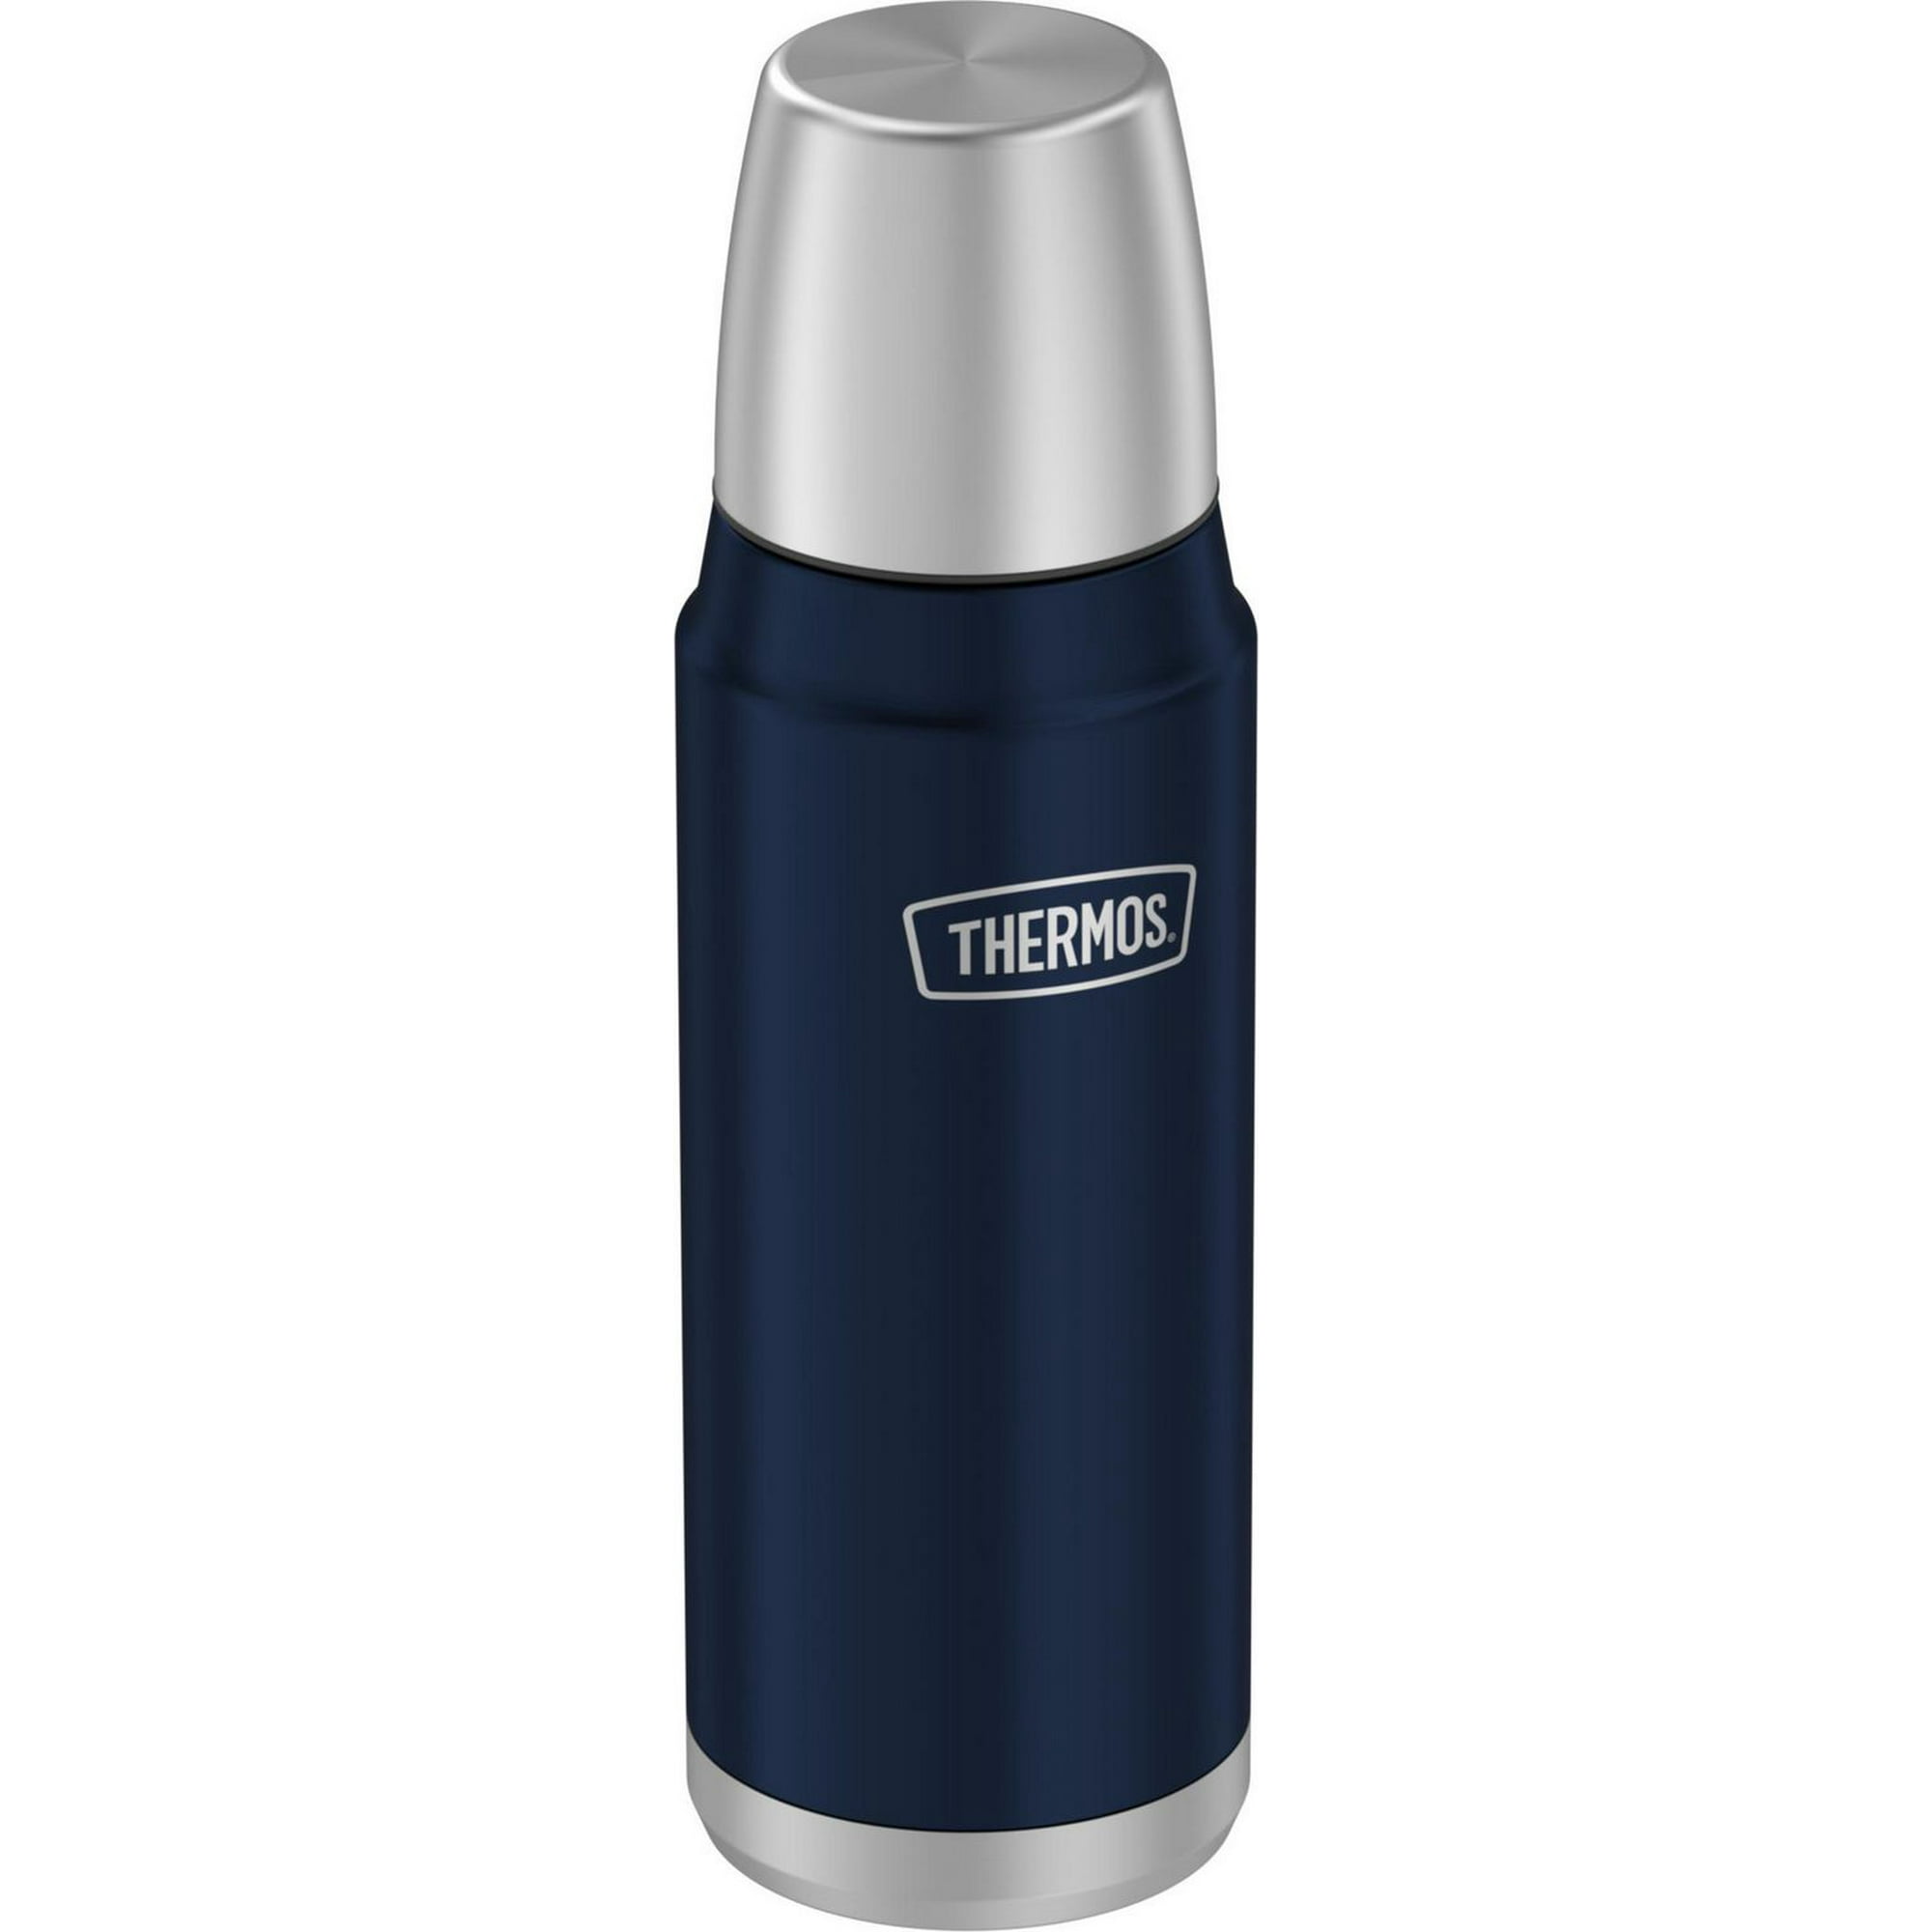 Thermos Vacuum Insulated Stainless Steel 16 Oz Compact Beverage